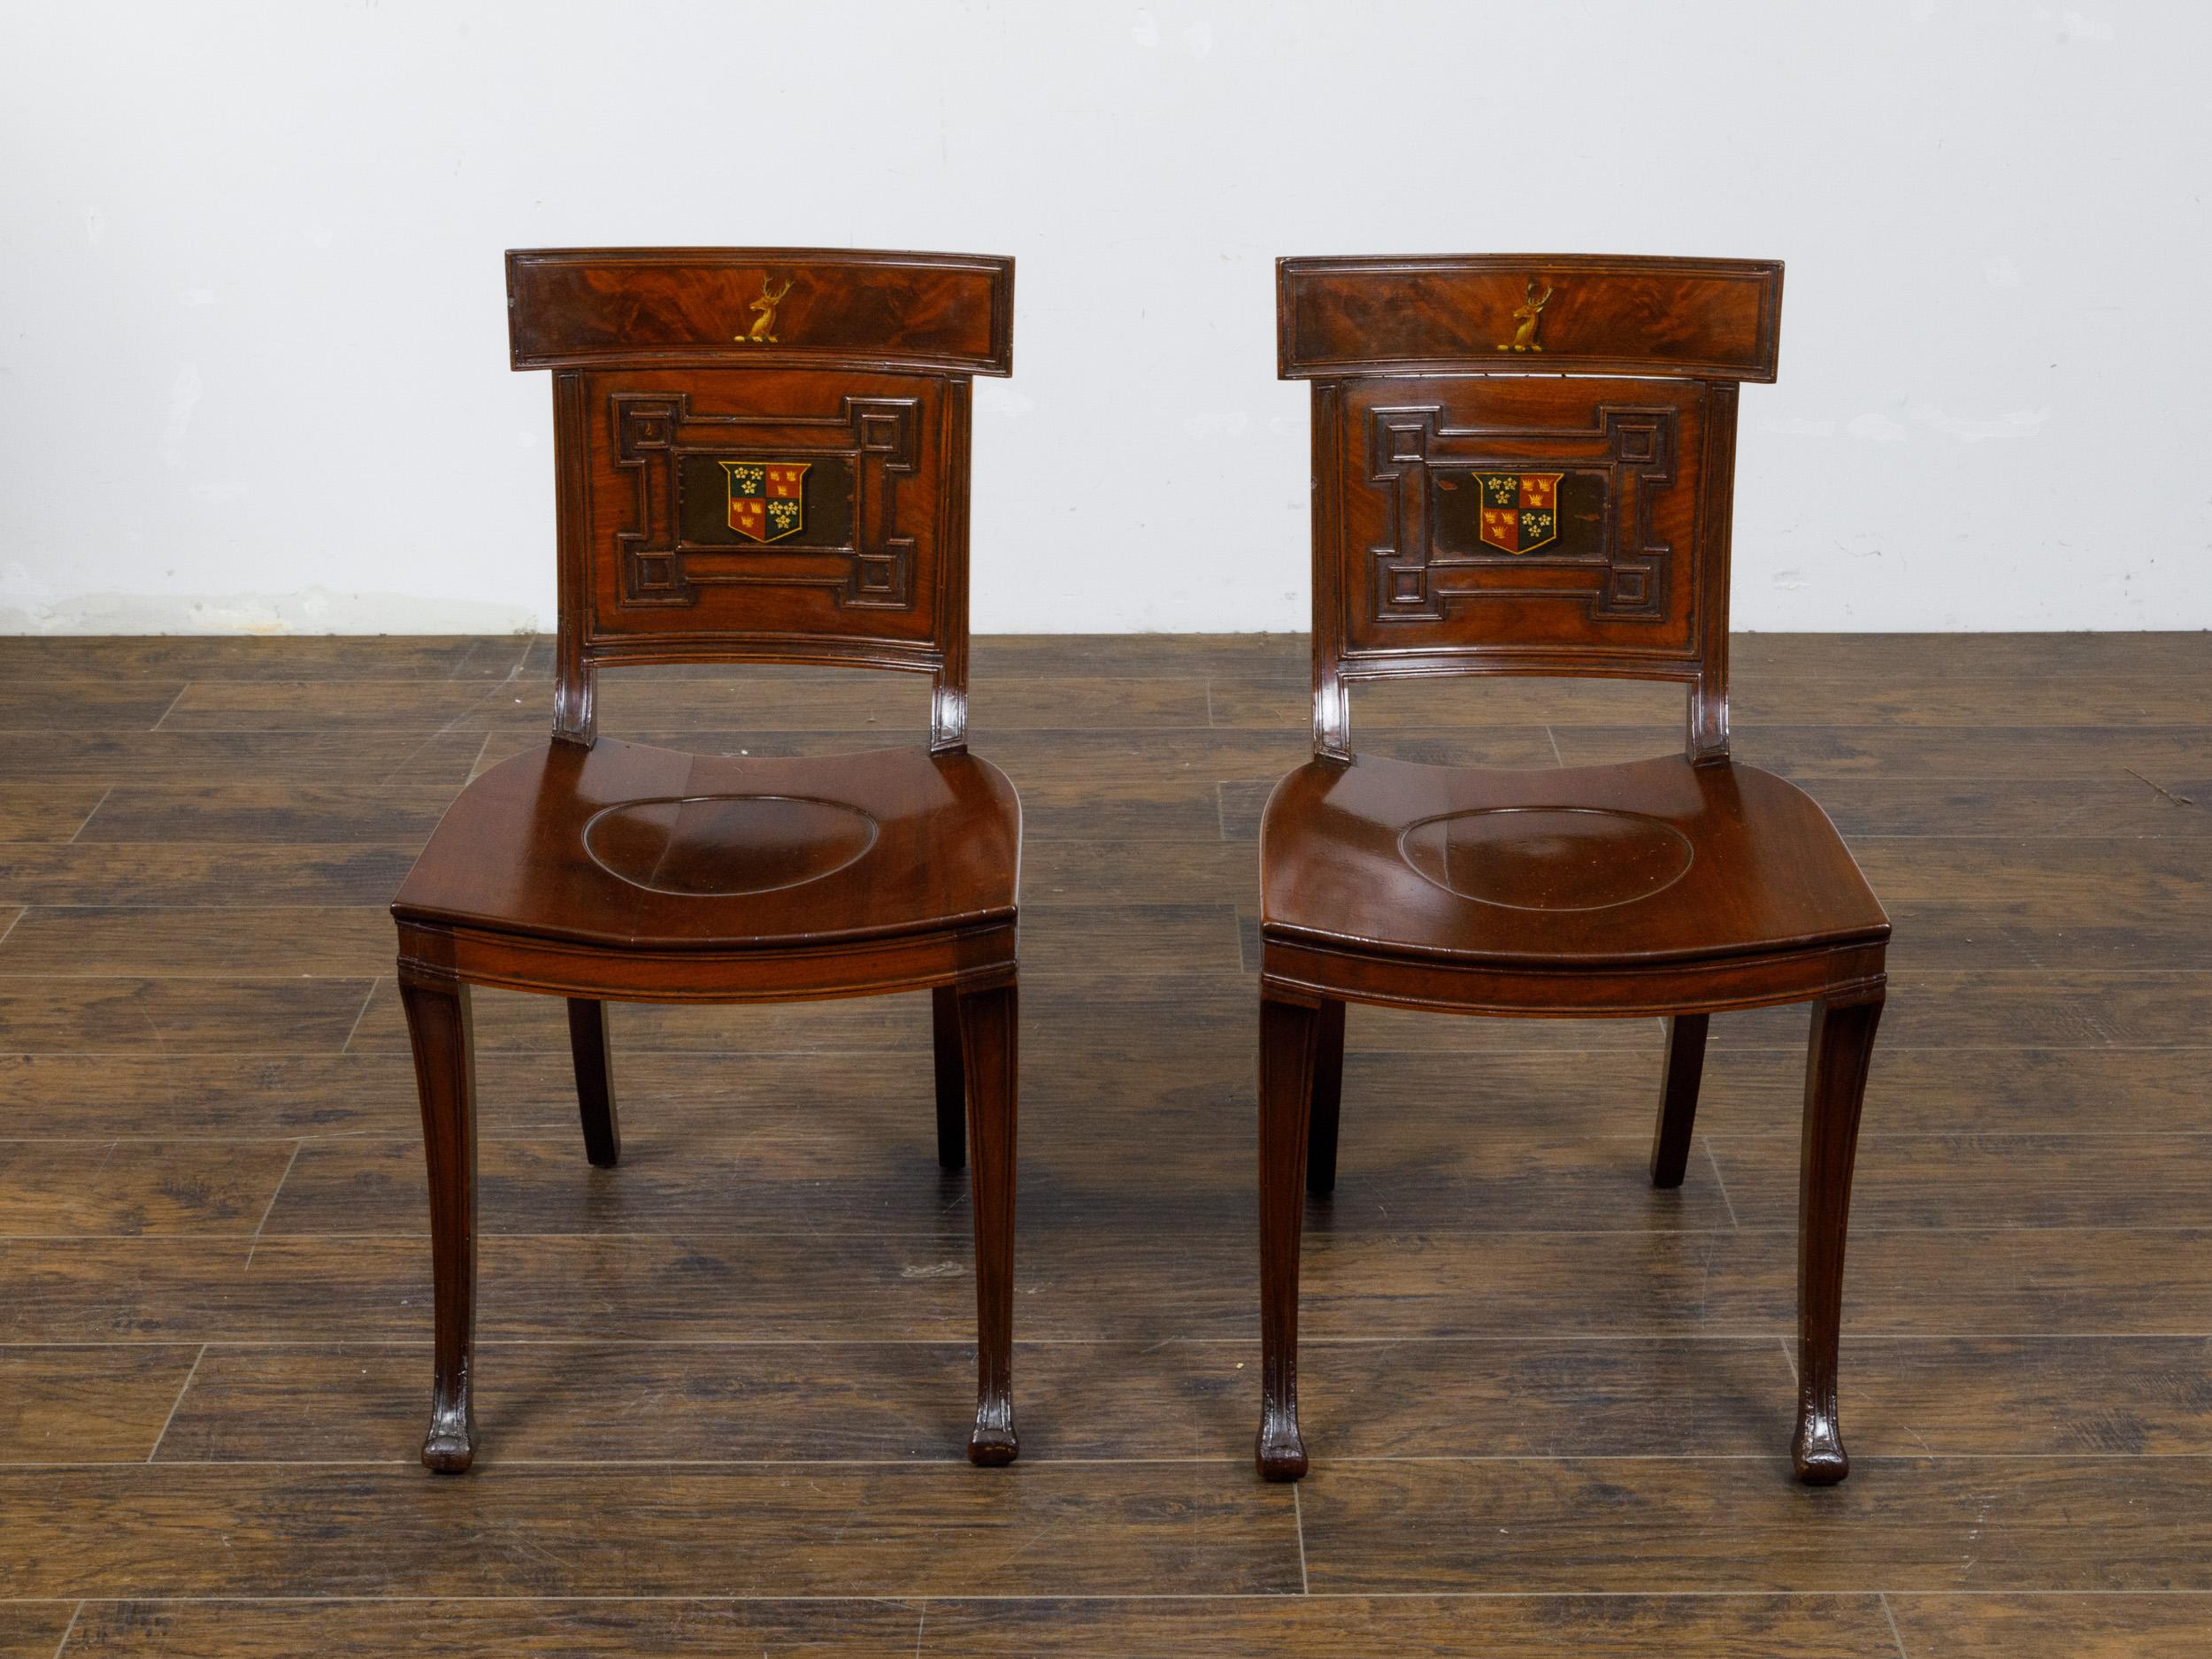 Pair of English Regency Mahogany Hall Chairs with Painted Coat of Arms For Sale 8